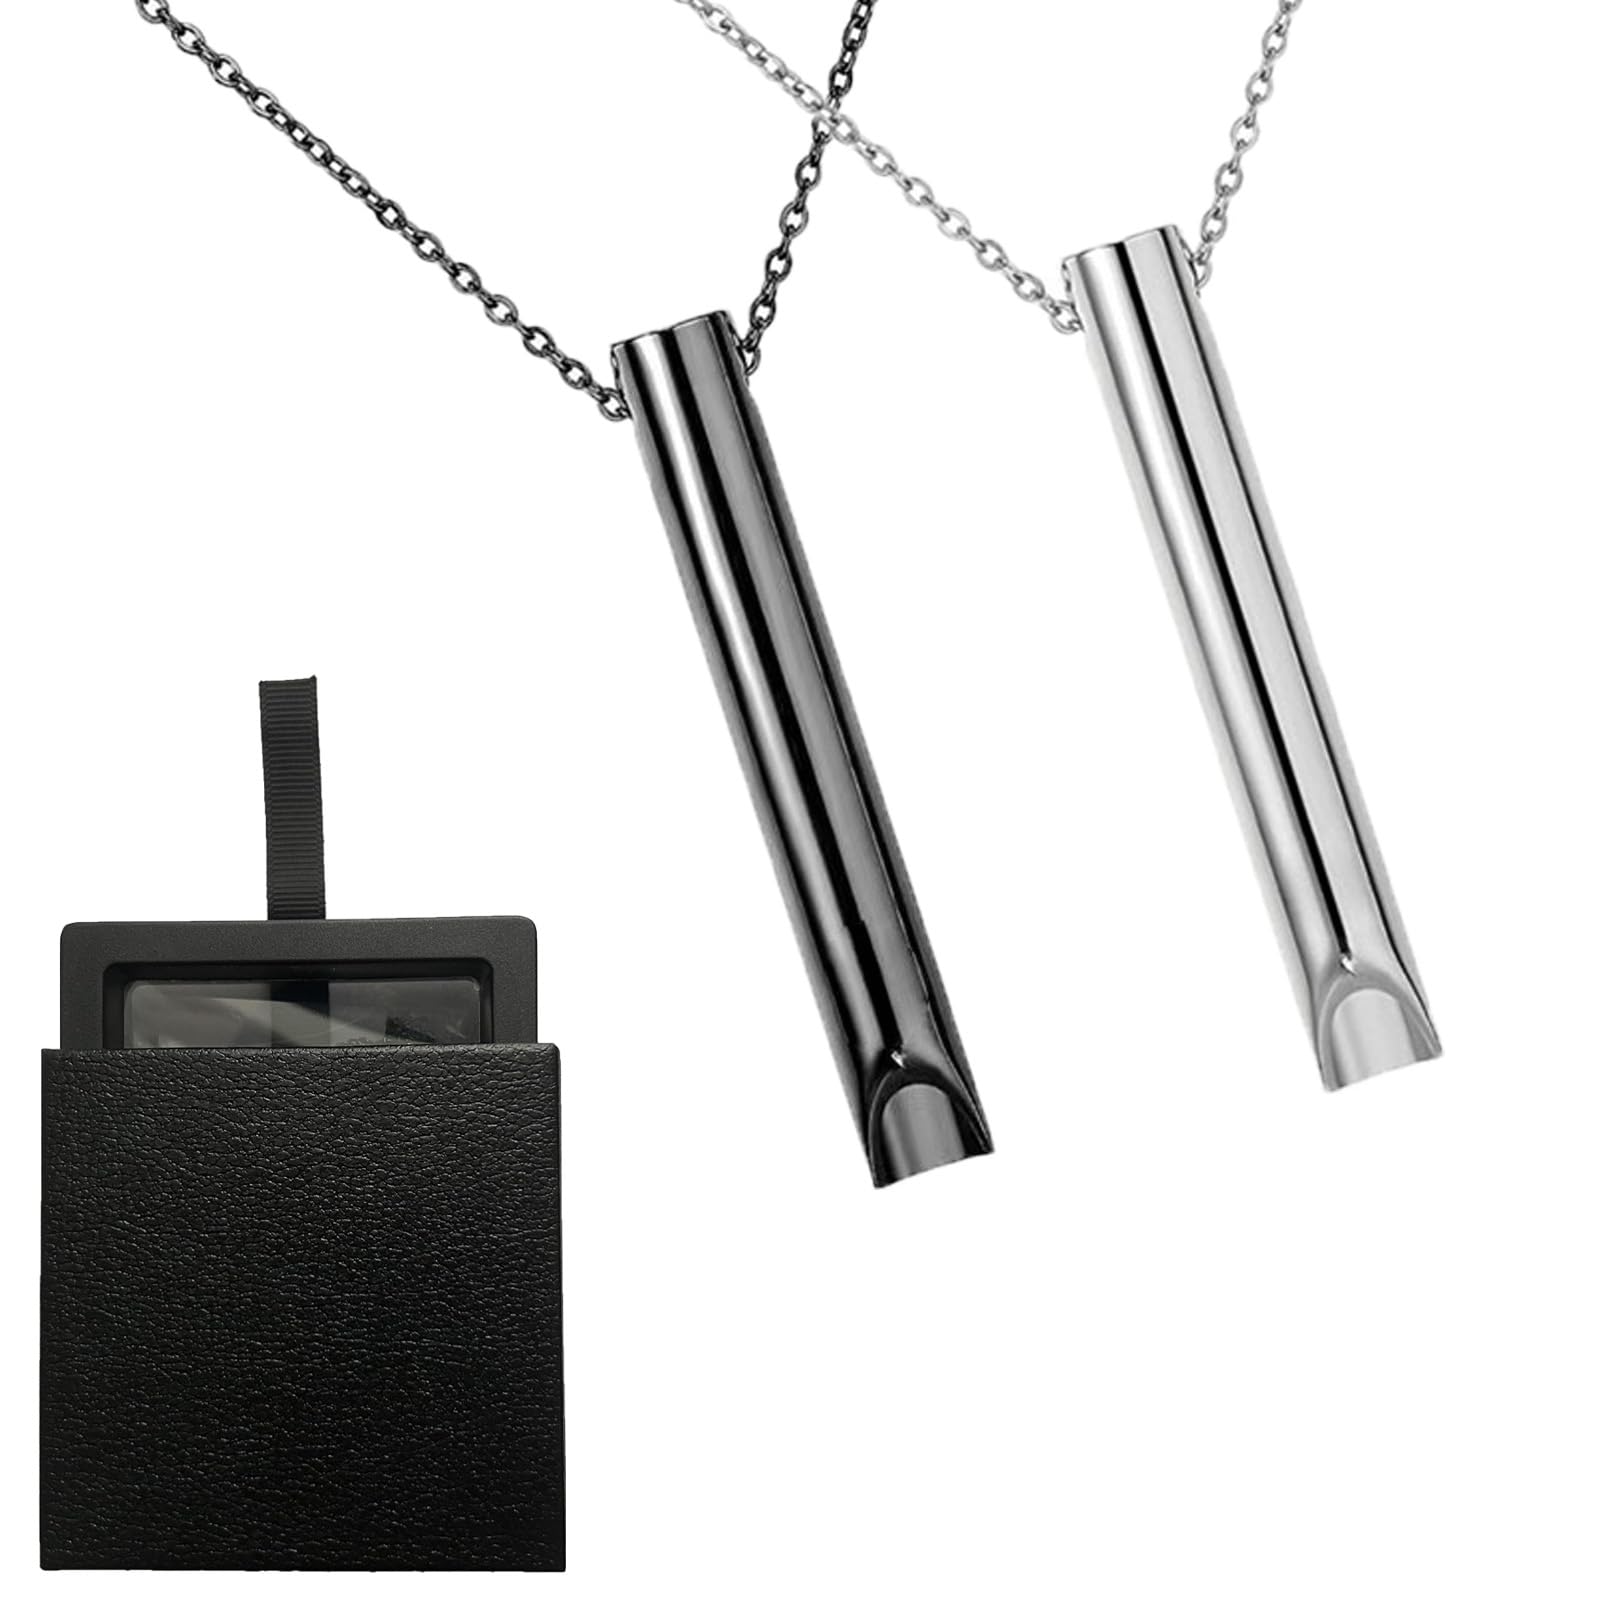 Hā Tool Classic Charcoal | Anxiety & Stress Relief Necklace – Hā Habit